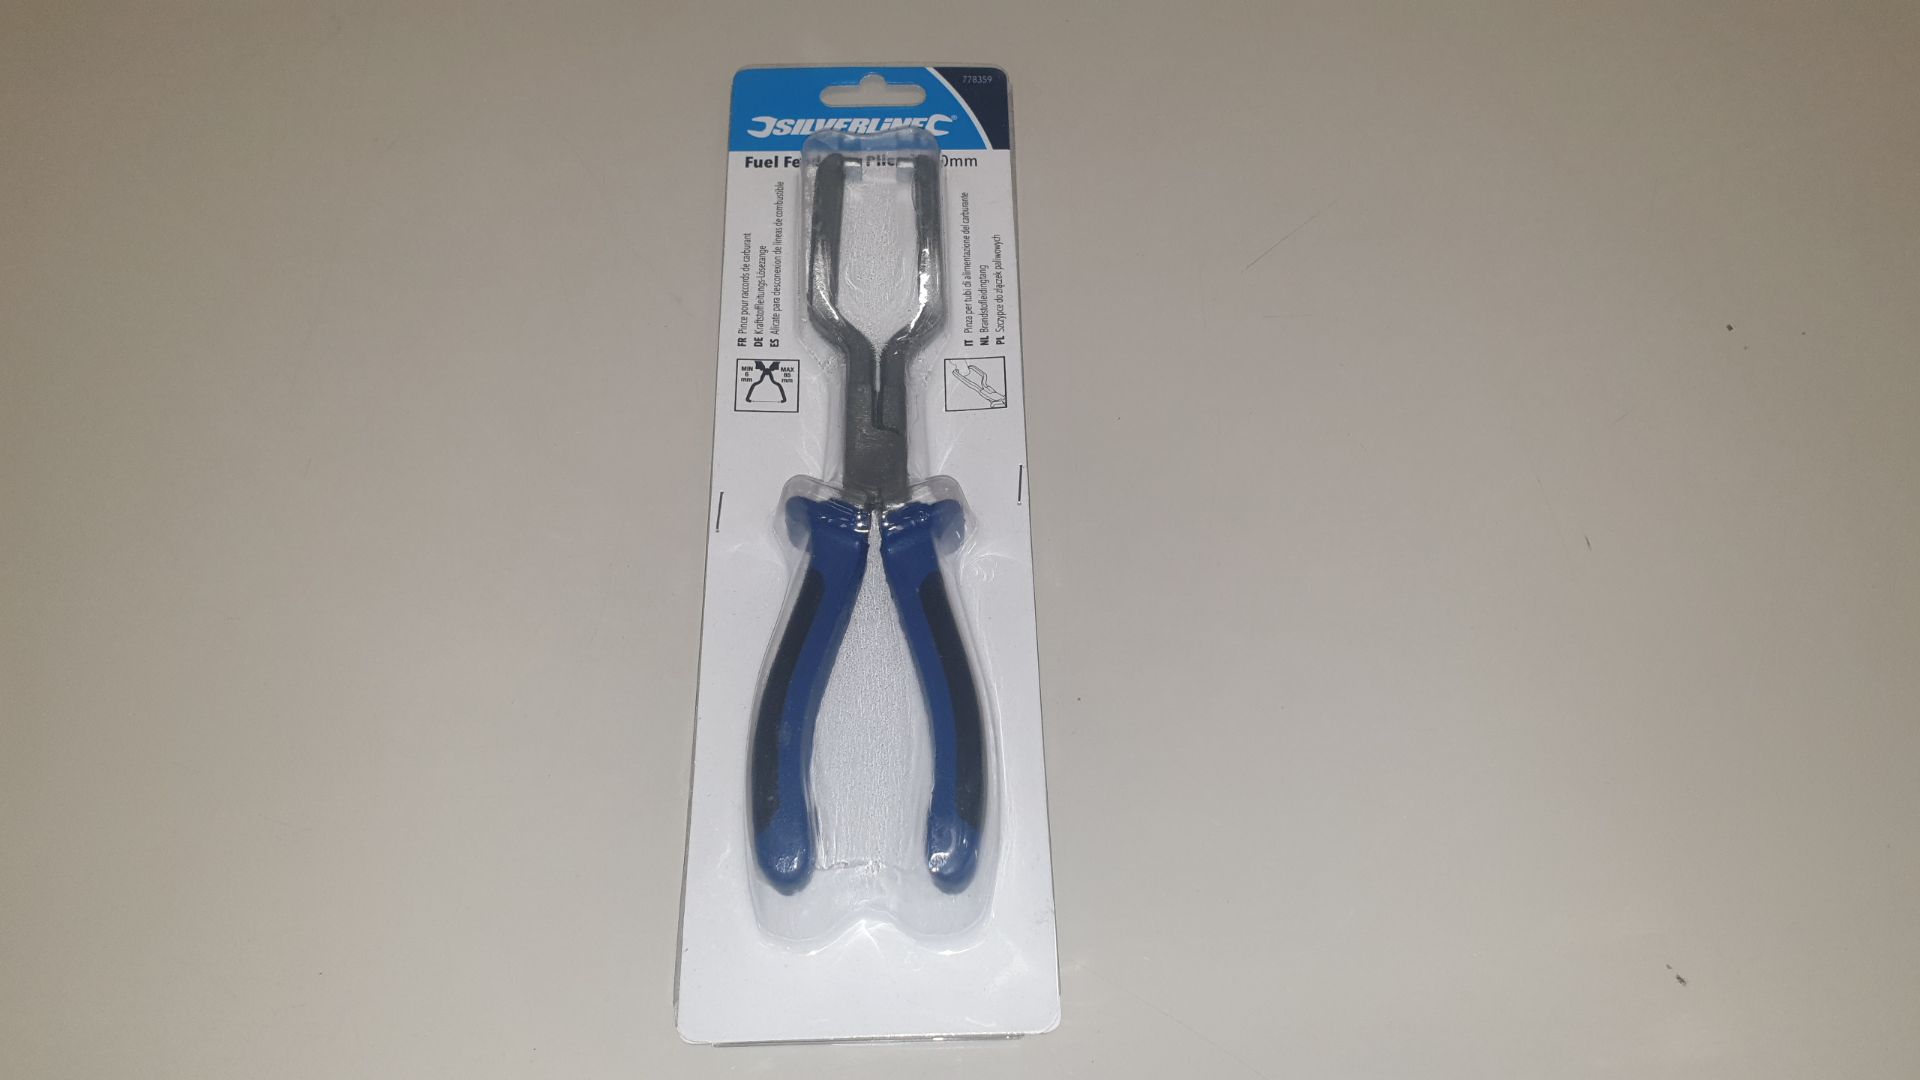 24 X BRAND NEW SILVERLINE FUEL FEED PIPE PLIERS 150MM (PROD CODE 778359) TRADE PRICE £10.55 (EXC